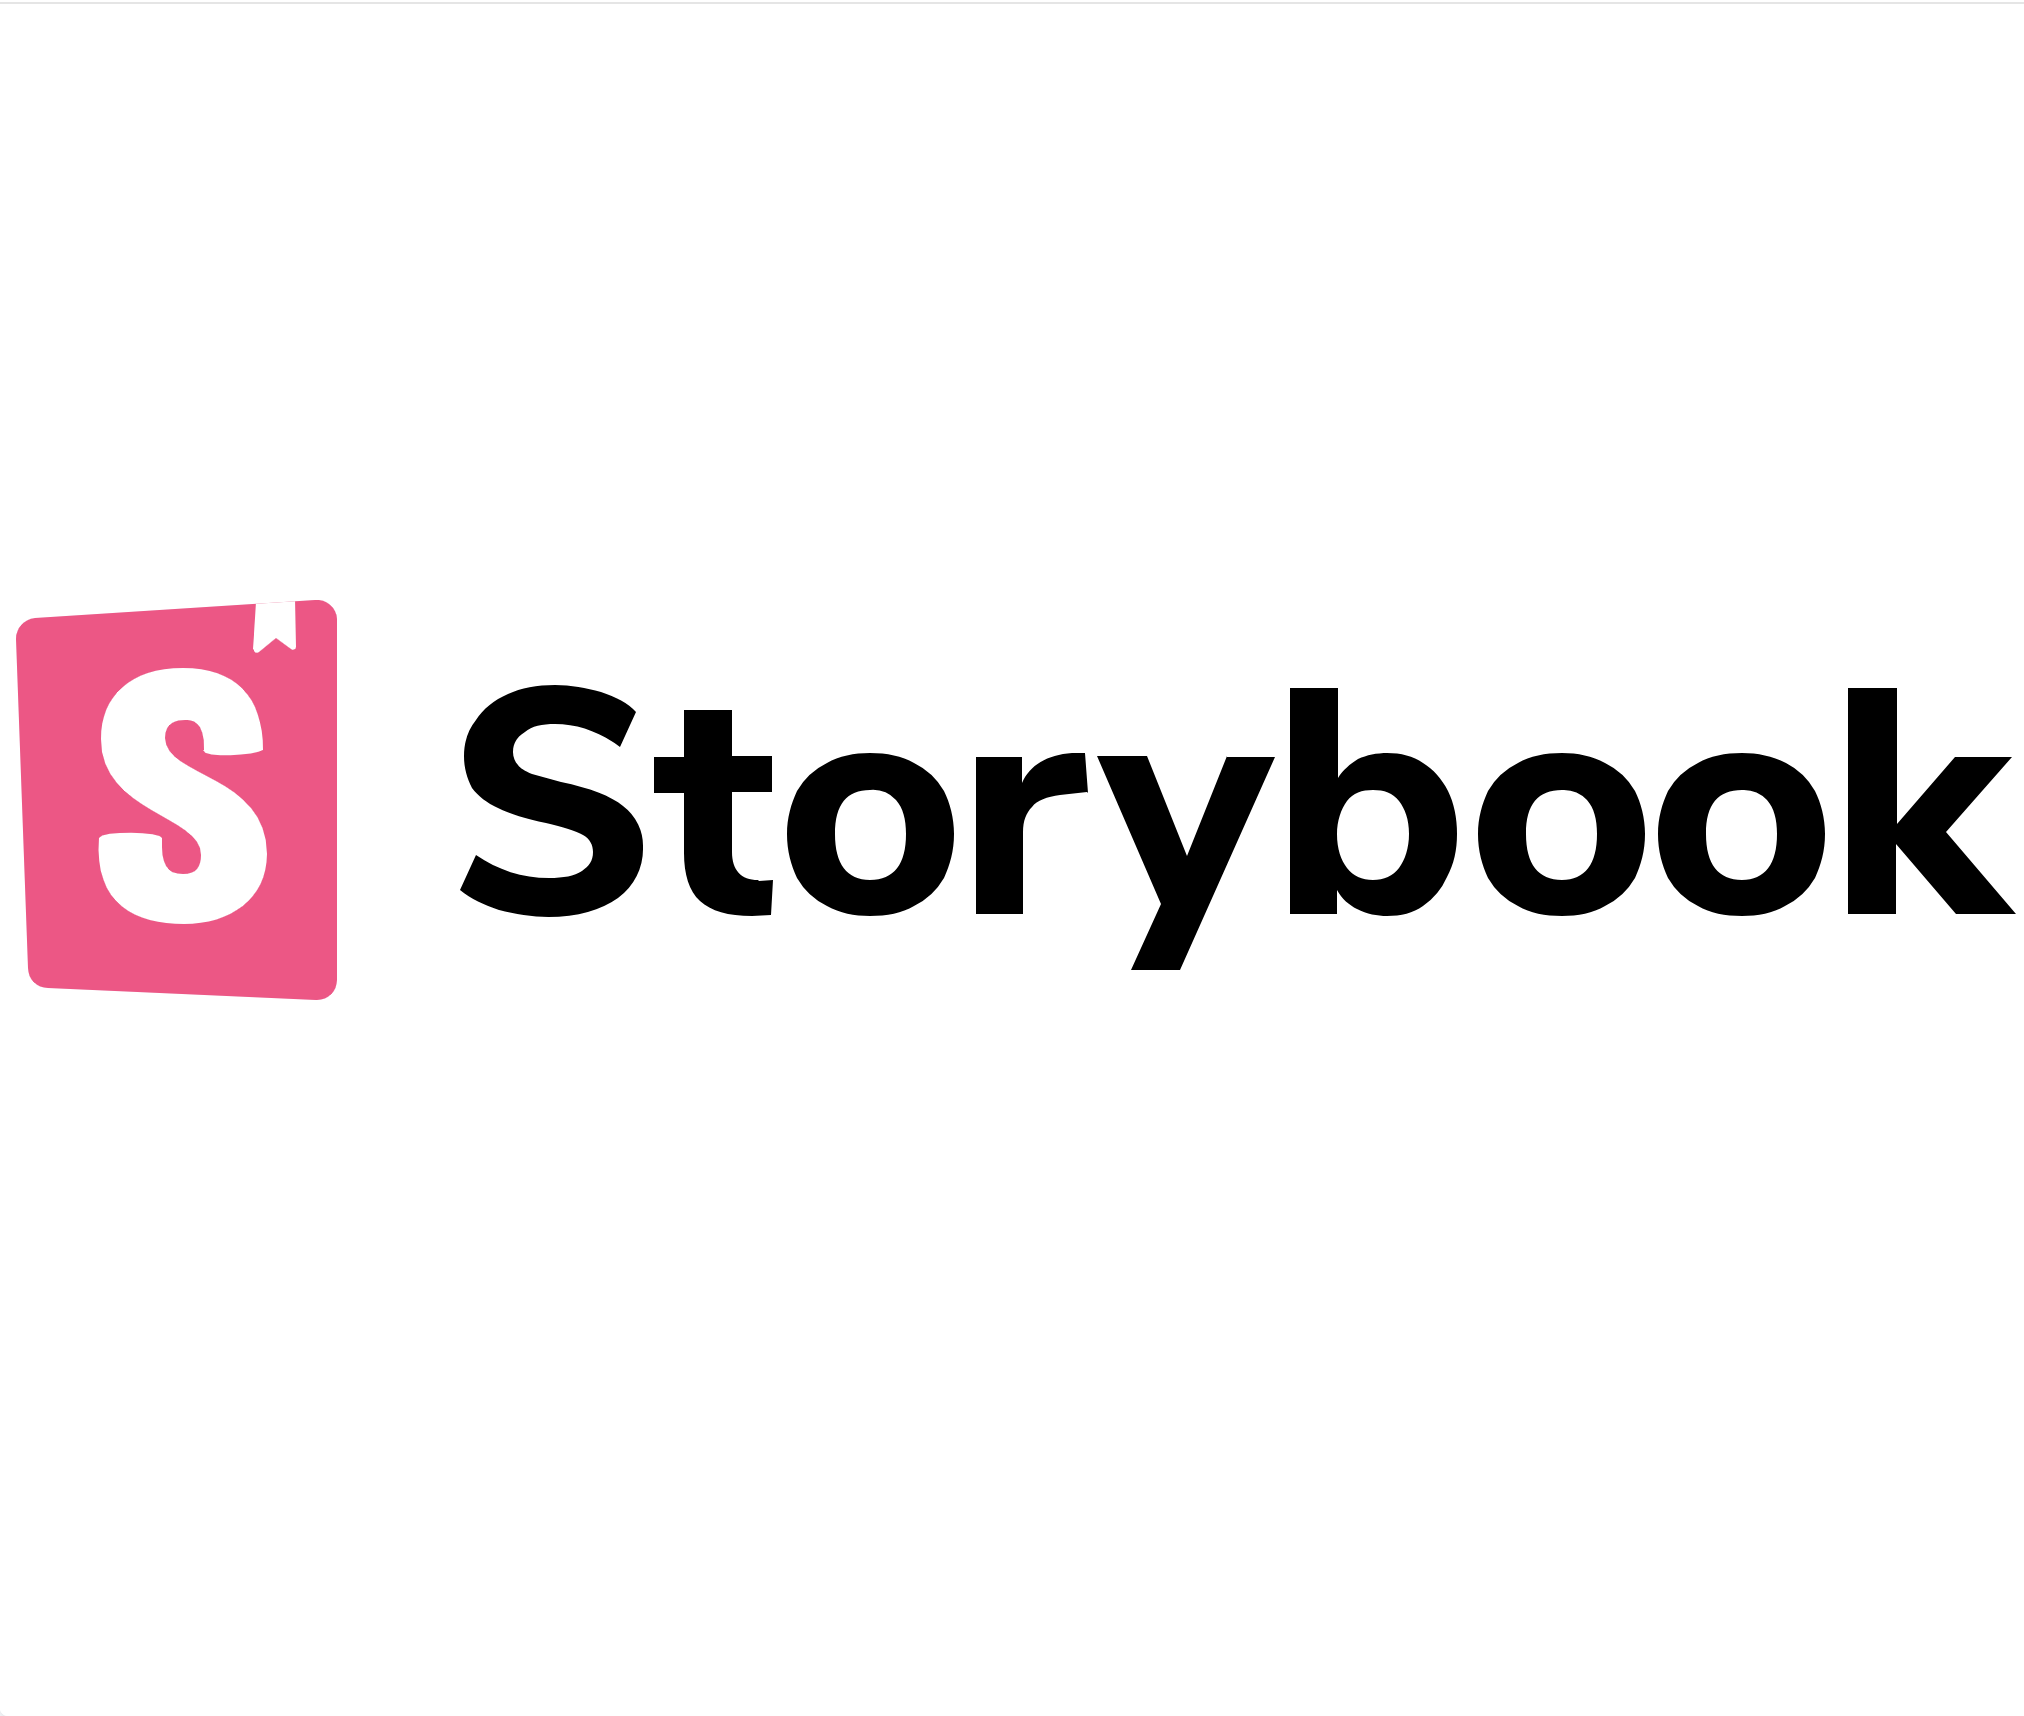 Getting started with Storybook 5.0 for React | Frontend Development